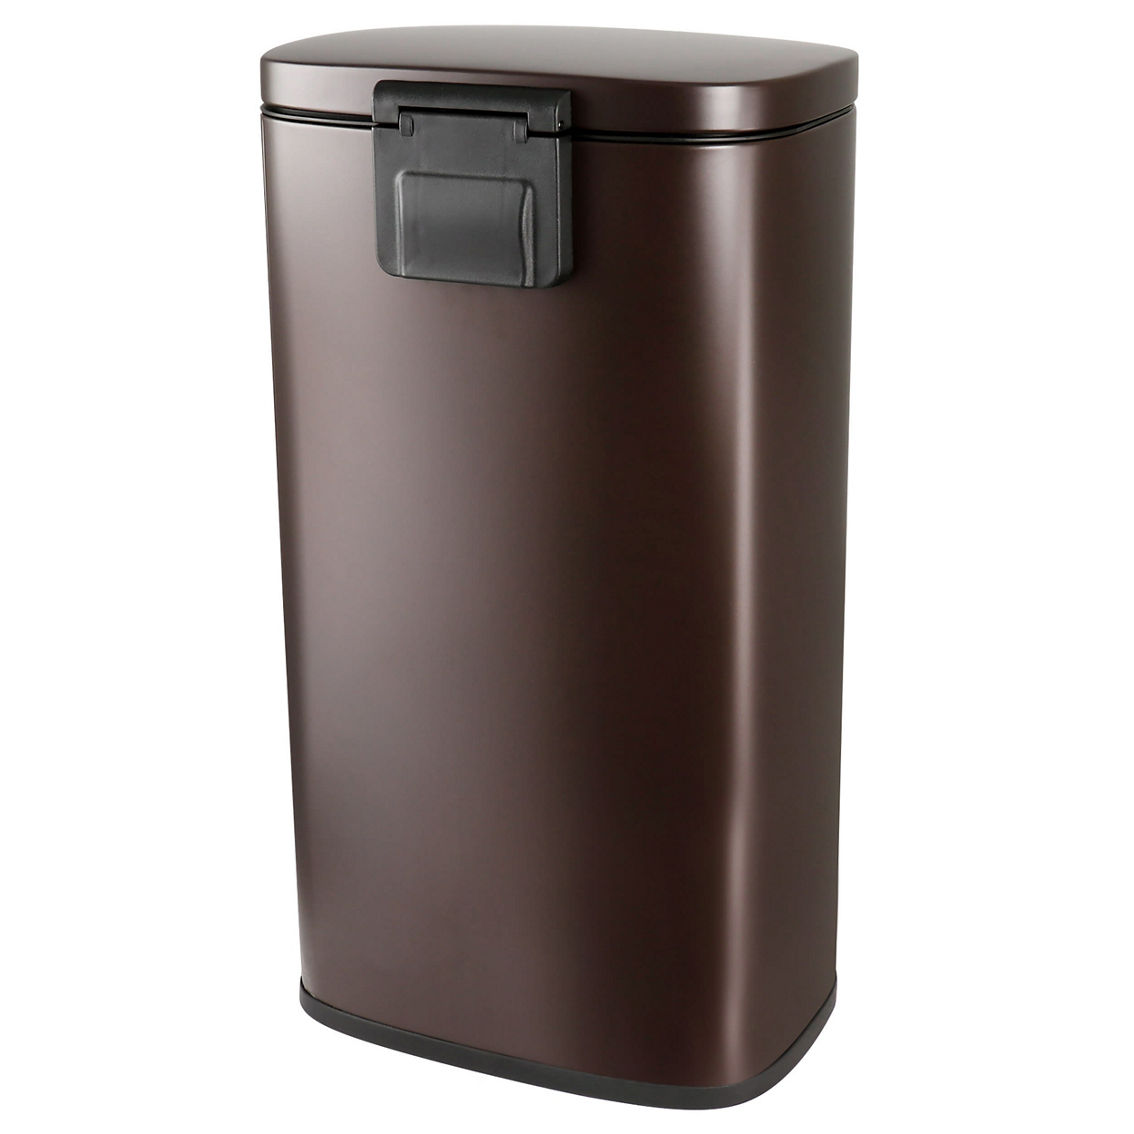 Elama 3 Piece 30 Liter and 5 Liter Stainless Steel Step Trash Bin Combo Set with - Image 4 of 5